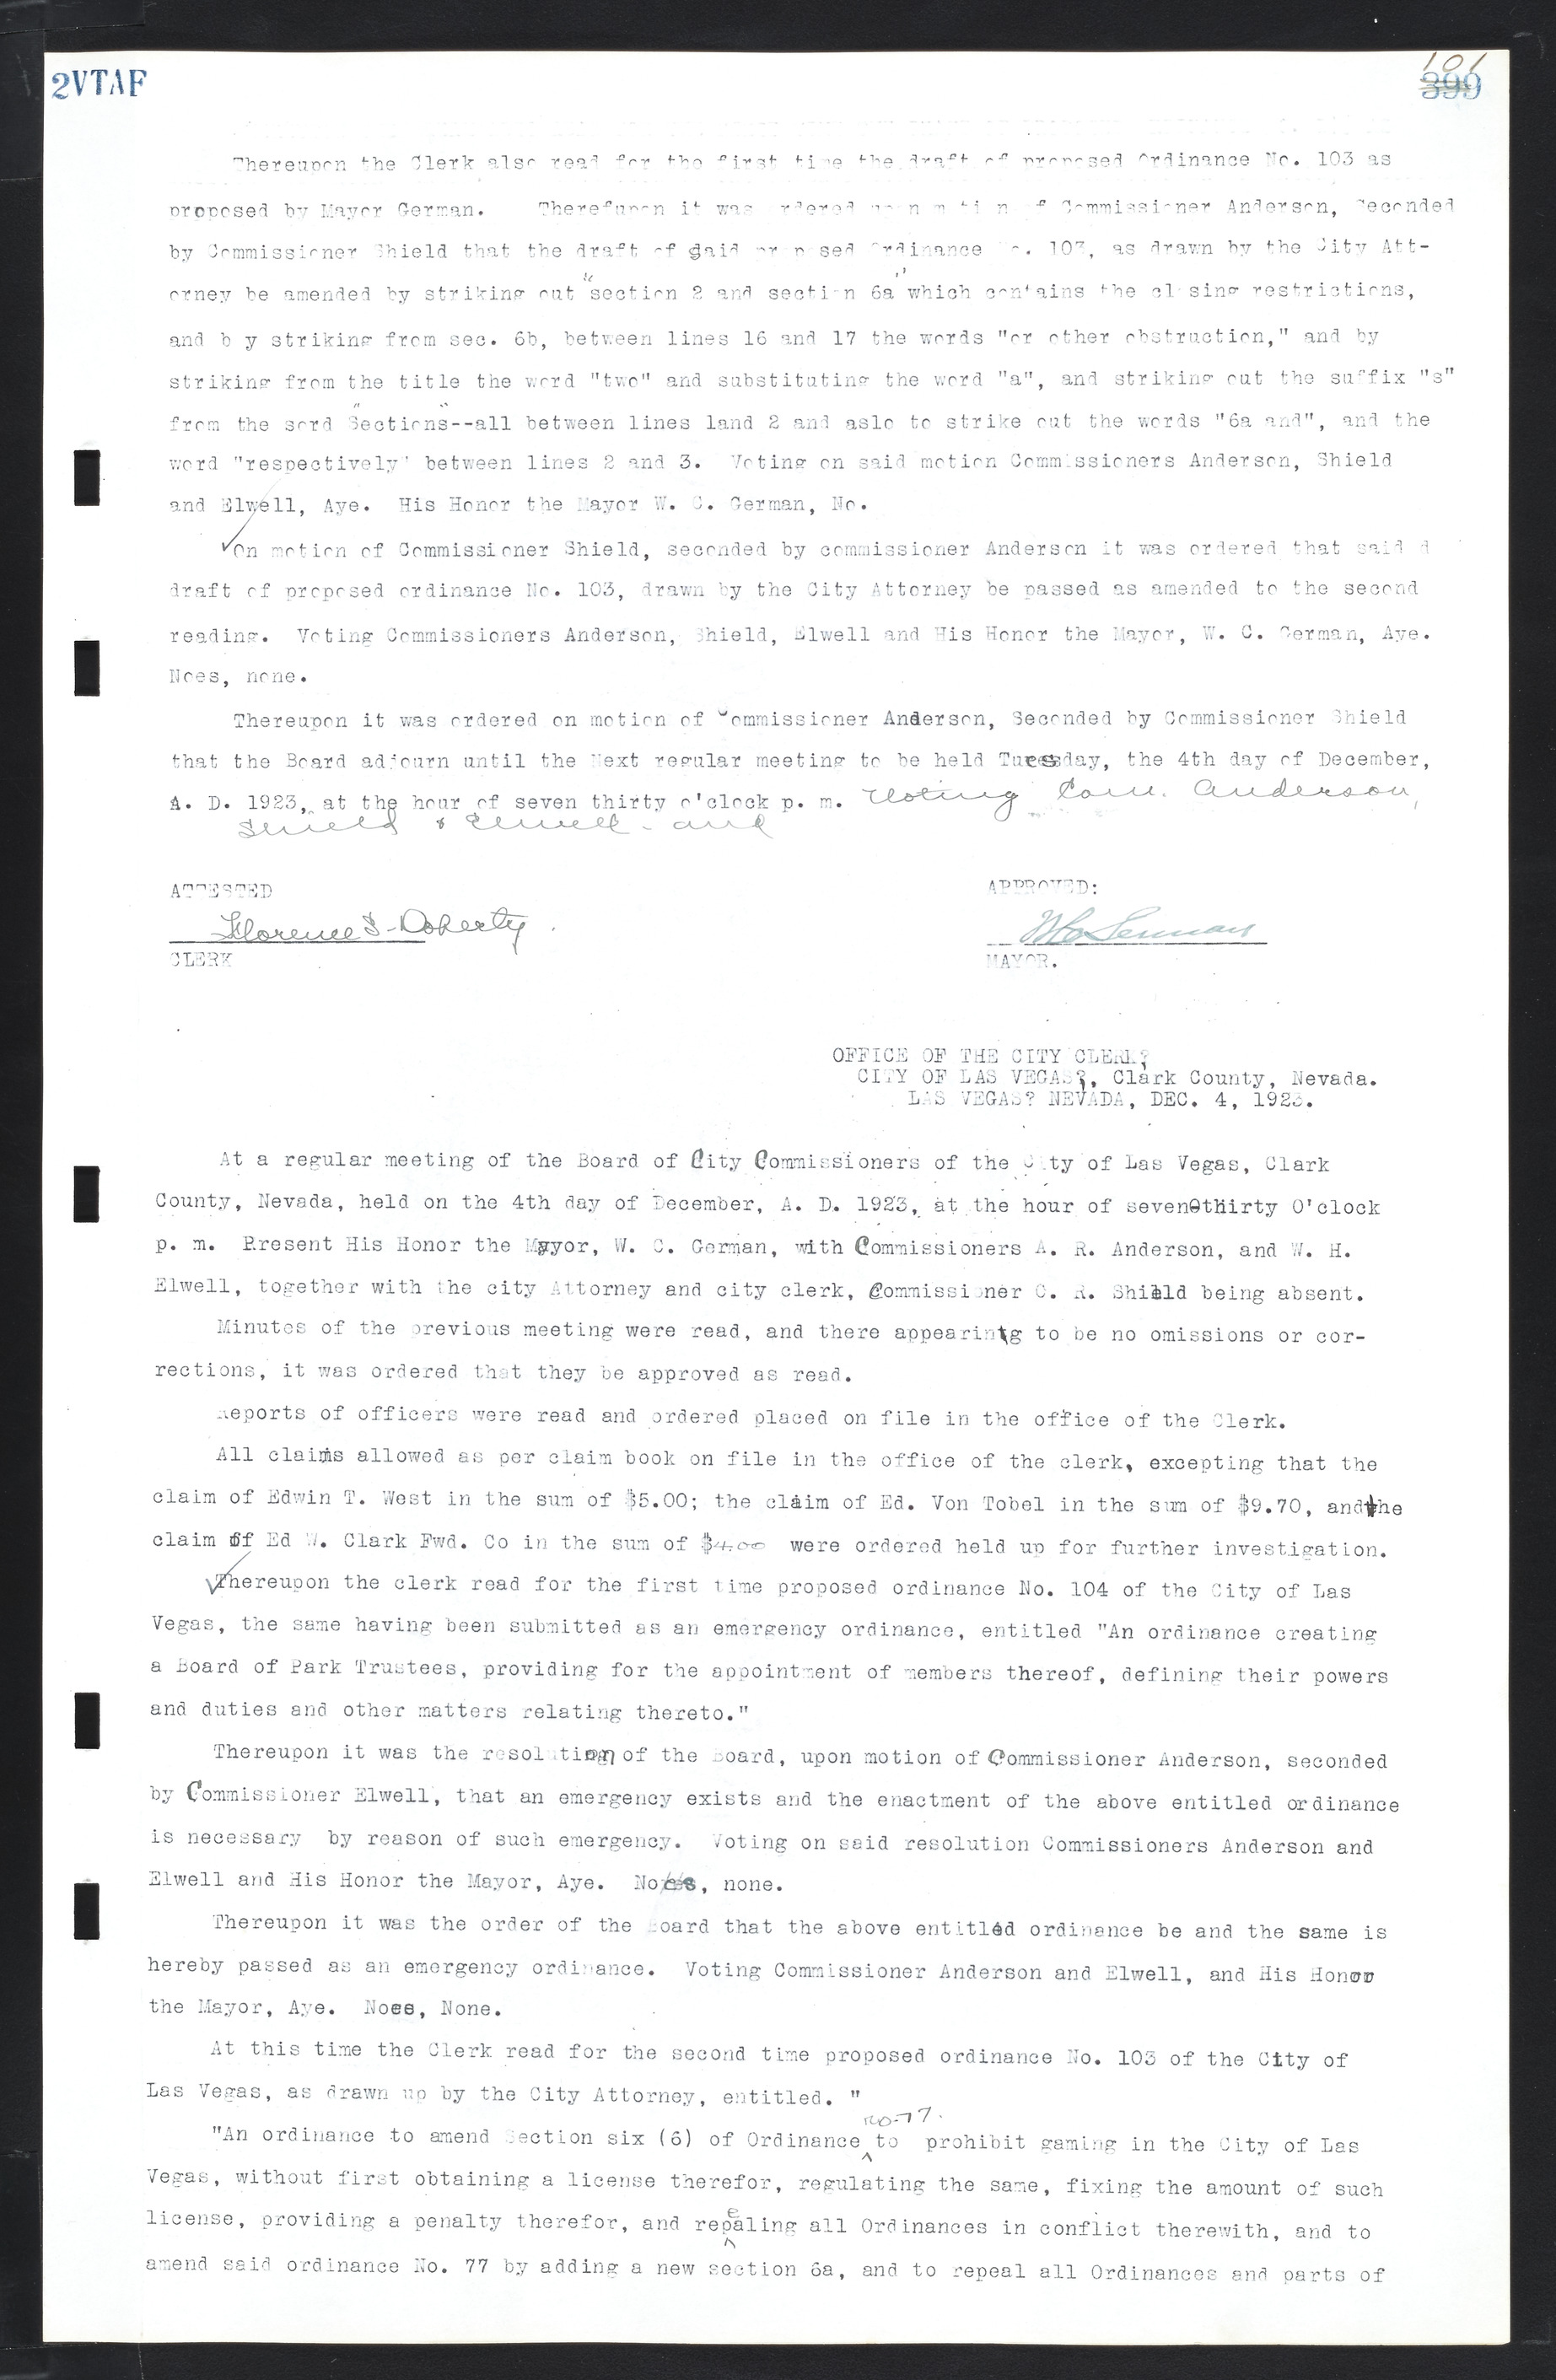 Las Vegas City Commission Minutes, March 1, 1922 to May 10, 1929, lvc000002-108